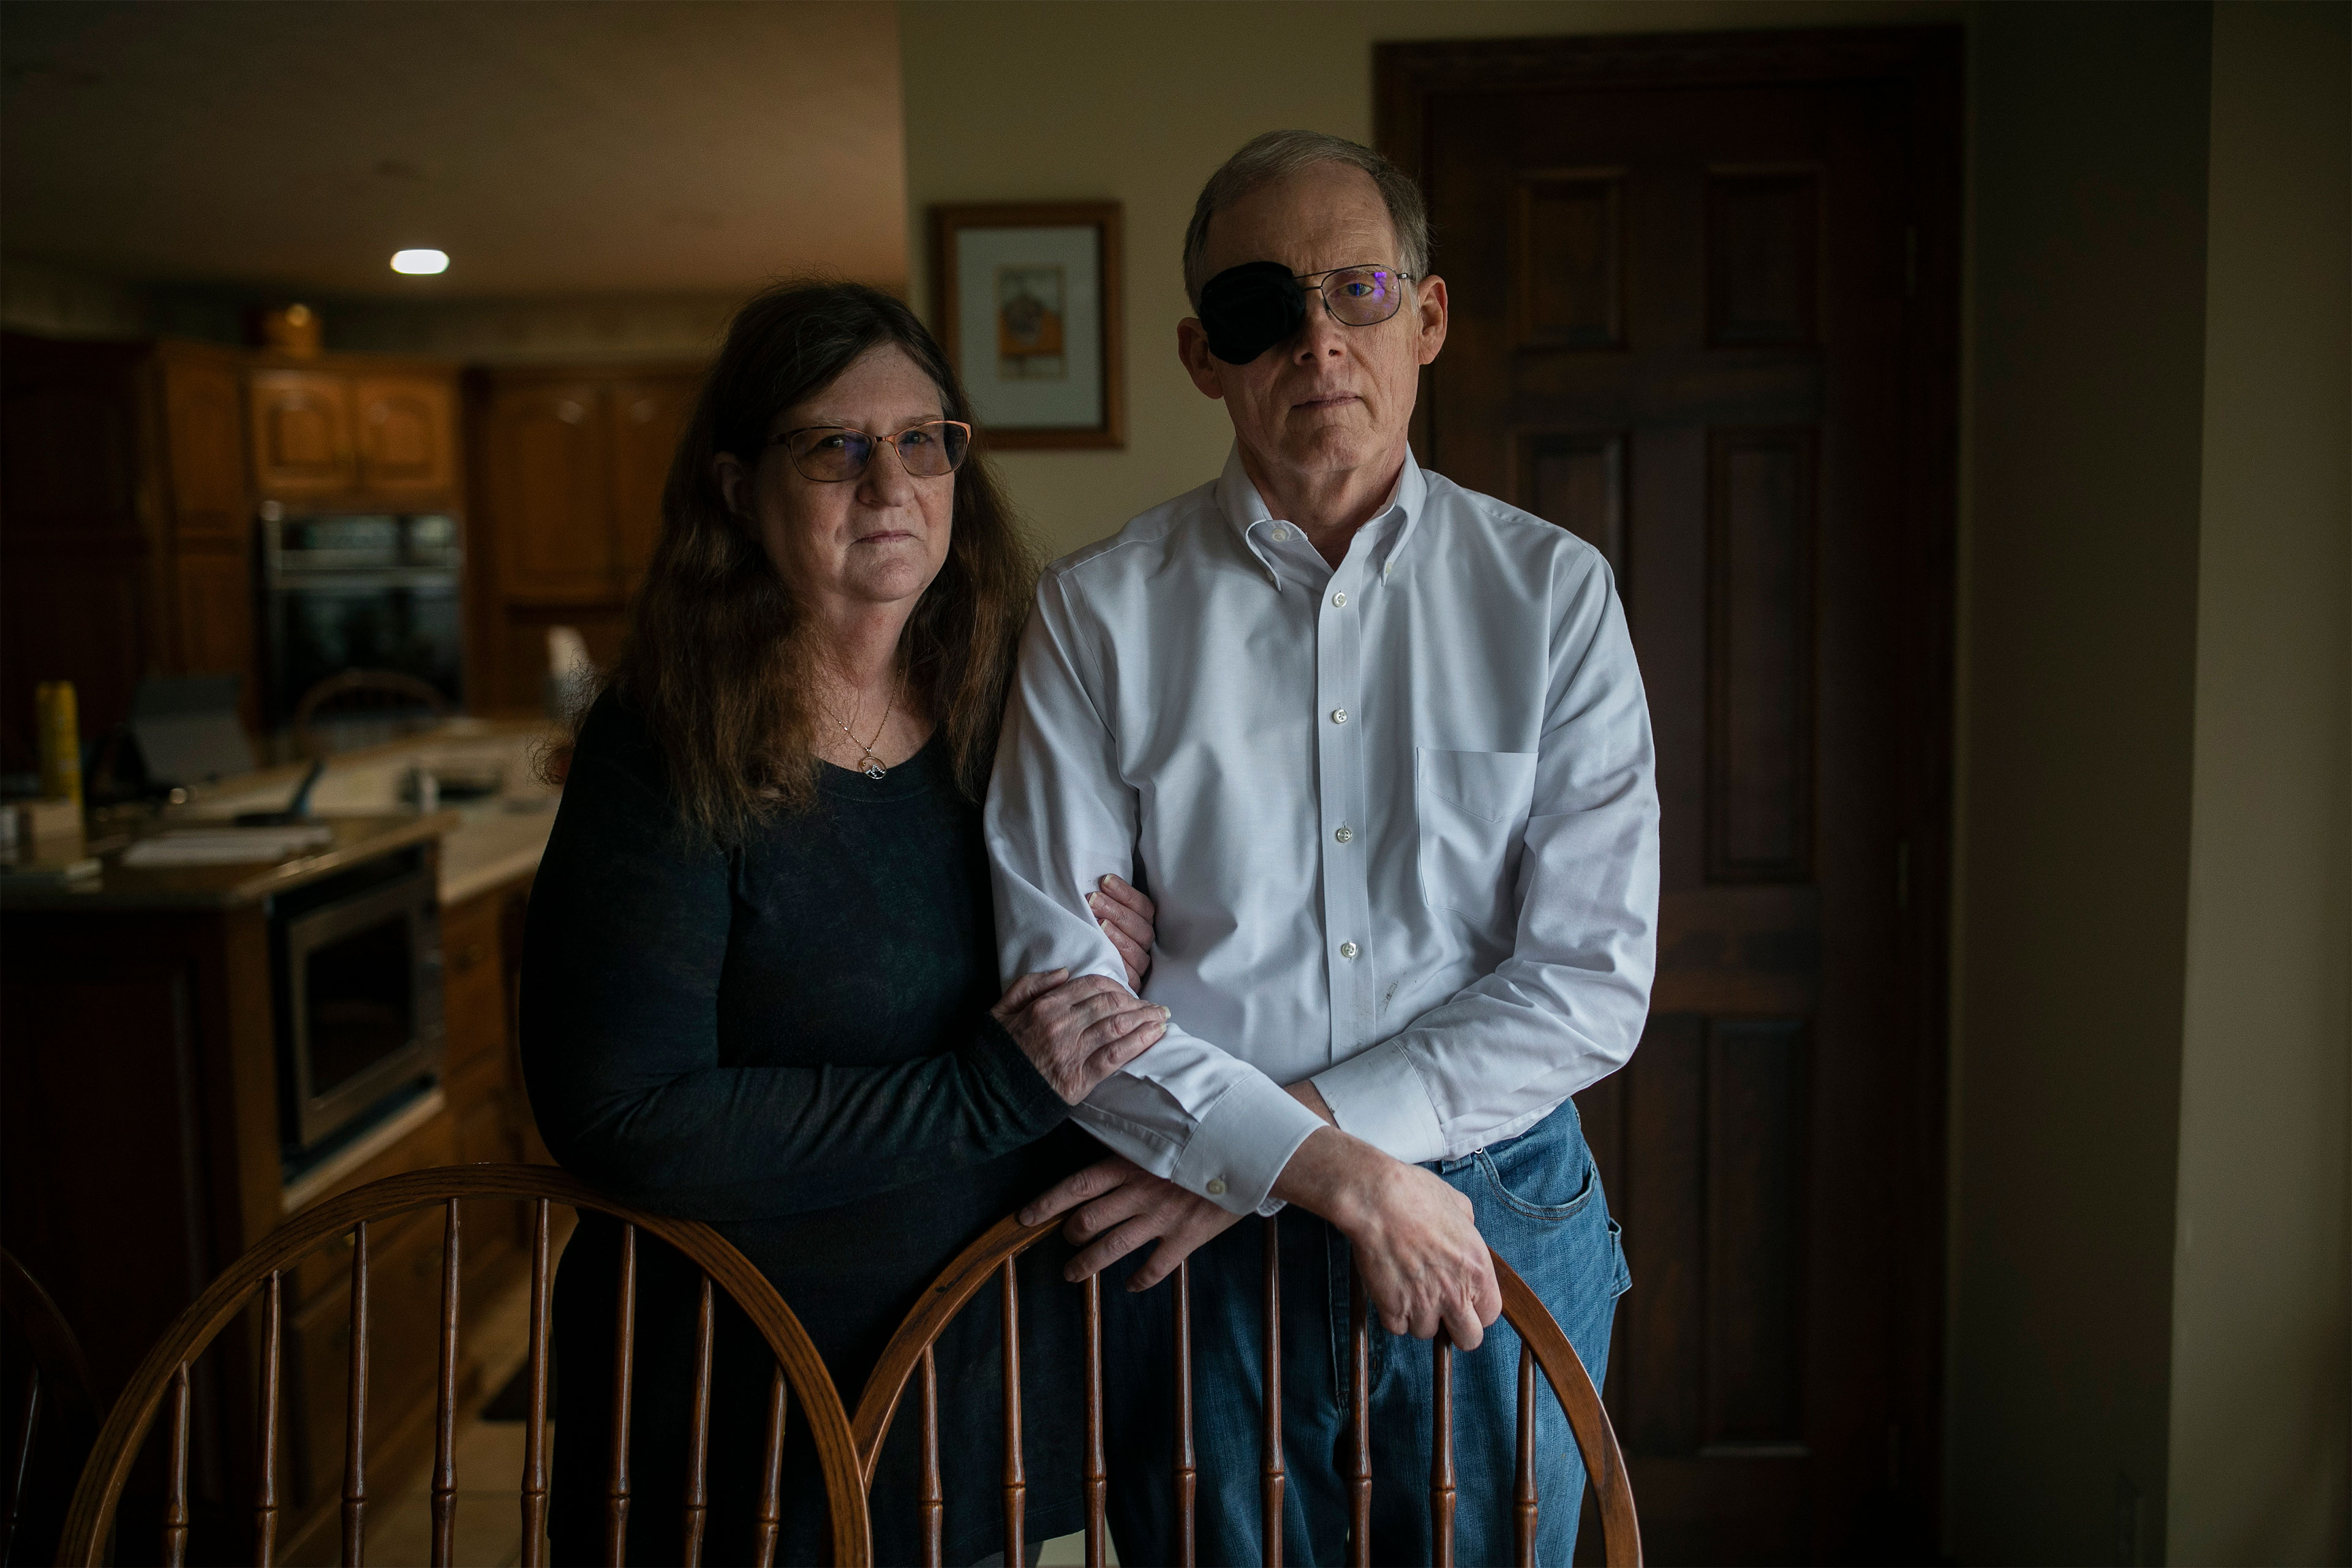 A woman and a man stand behind two dining room chairs. They are both wearing glasses and the man has a black cloth covering his right eye over his glasses. She is gently holding his right arm with both hands.